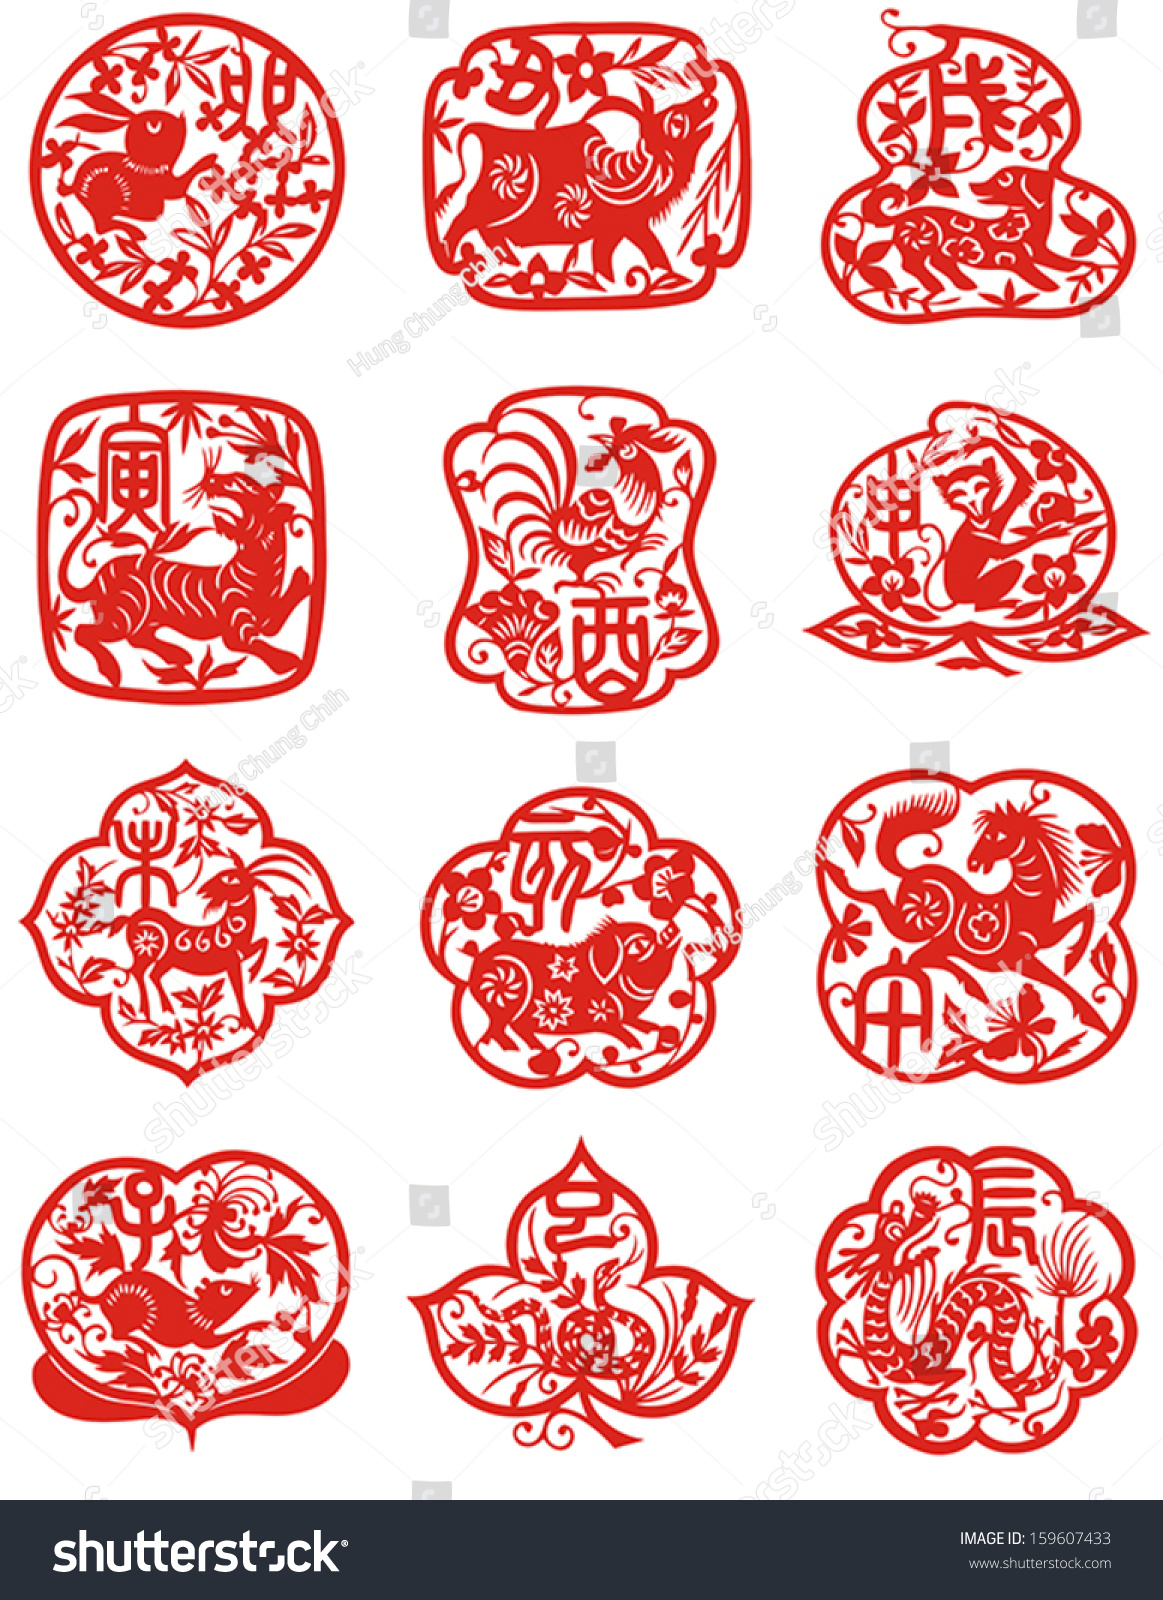 SVG of Vector illustration of 12 Chinese zodiac signs svg